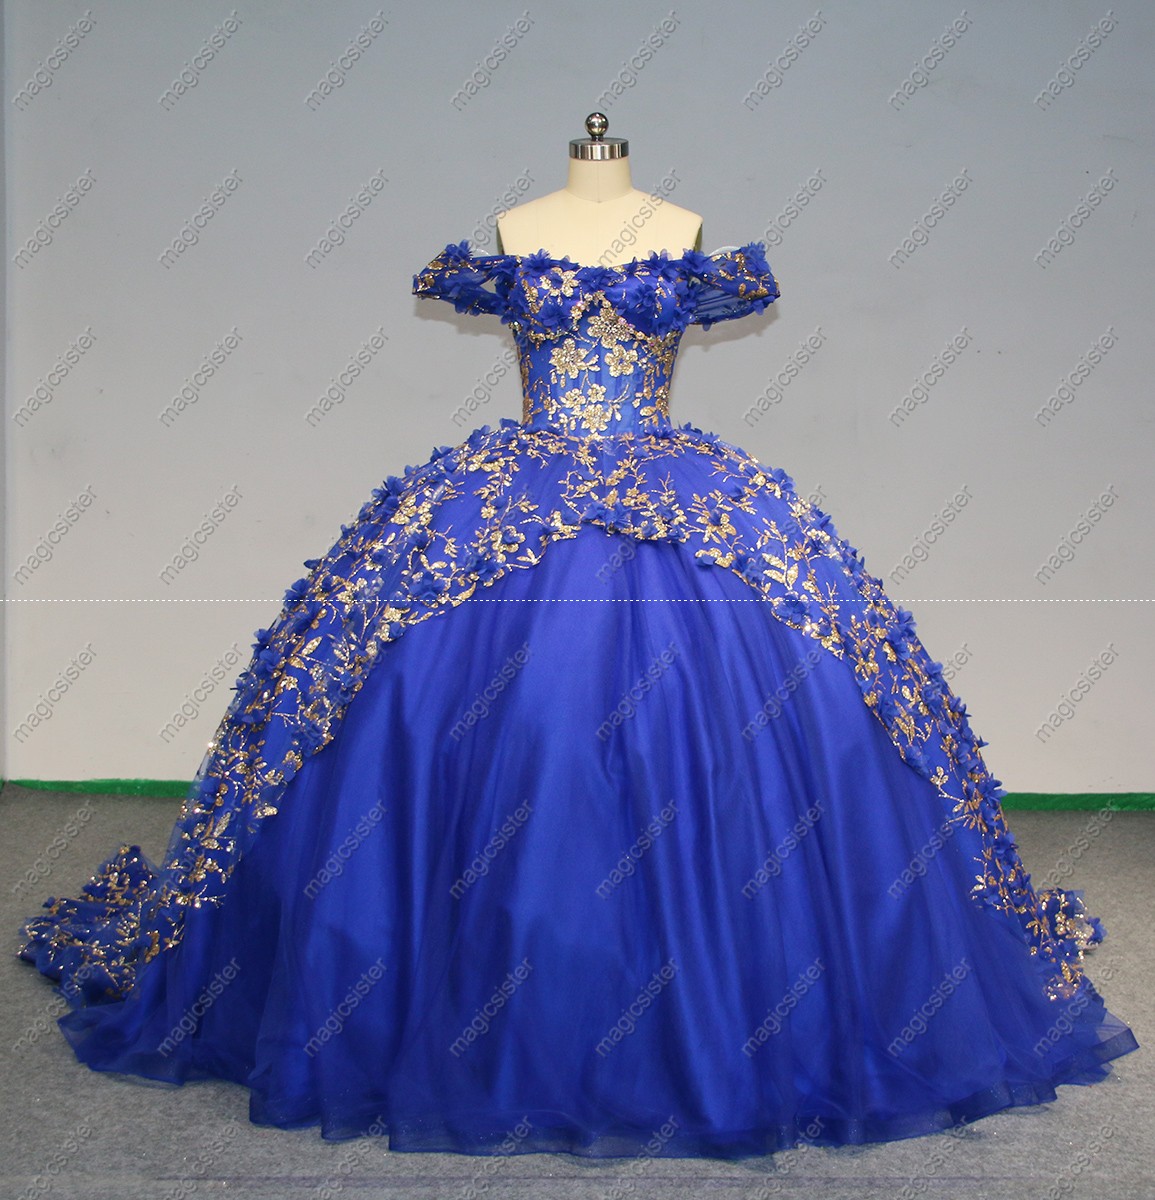 Instock Factory Glitter Fabric and 3D Flowers Quinceanera Dress